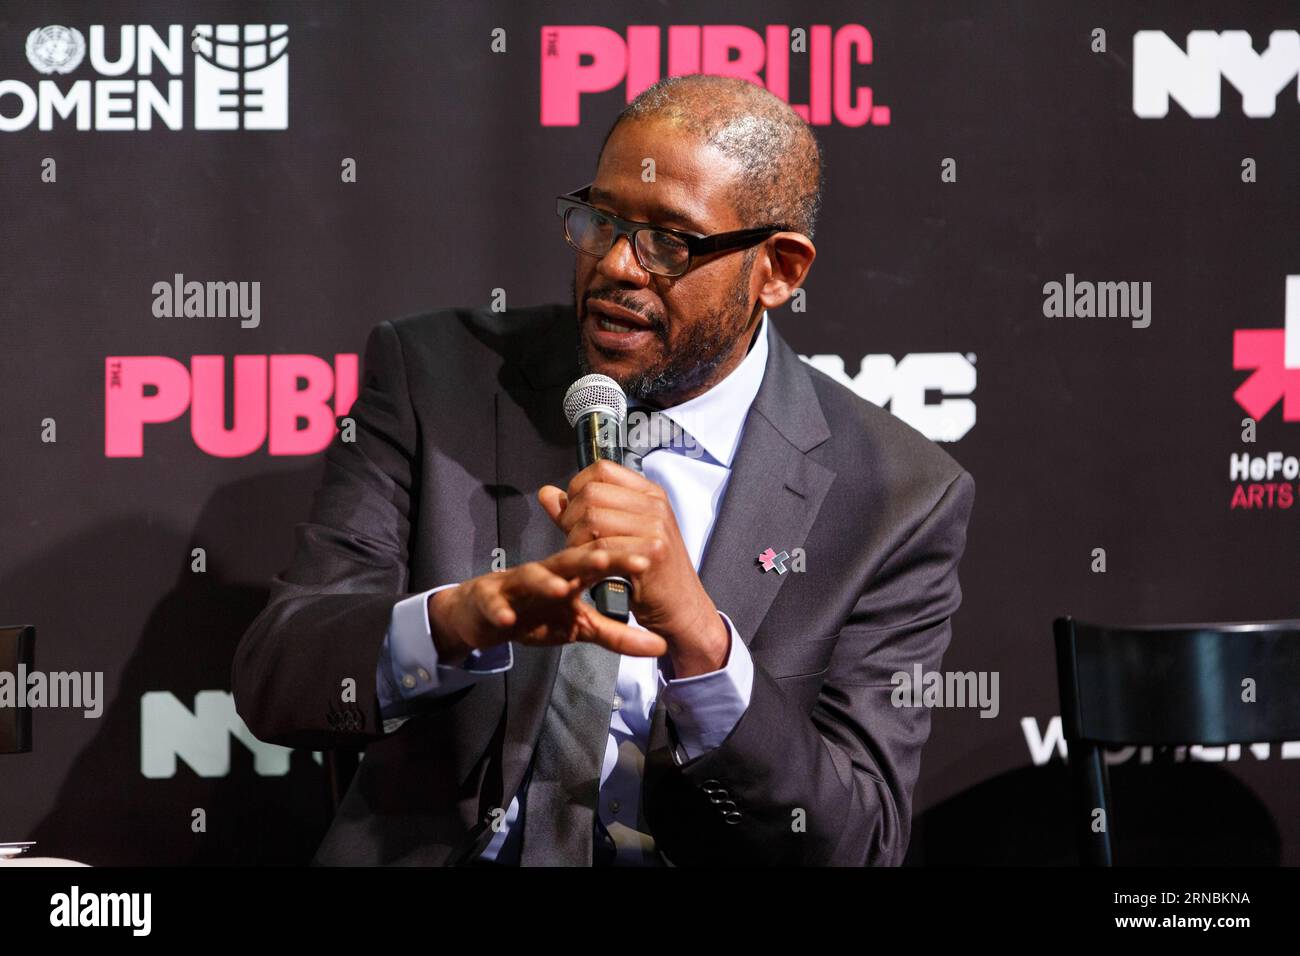 (160308) -- NEW YORK, March 8, 2016 -- American actor, UNESCO Special Envoy for Peace Forest Whitaker speaks during the UN Women s HeForShe Arts Week Launch Event at the Public Theatre in New York, March 8, 2016. UN Women on Tuesday launched a new initiative -- HeForShe Arts Week -- across New York City to promote gender equality via arts.The event, which is meant to commemorate the International Women s Day that falls on Tuesday, will run from March 8-15. ) UN-NEW YORK-HEFORSHE-LAUNCH LixMuzi PUBLICATIONxNOTxINxCHN   New York March 8 2016 American Actor Unesco Special Envoy for Peace Forest W Stock Photo